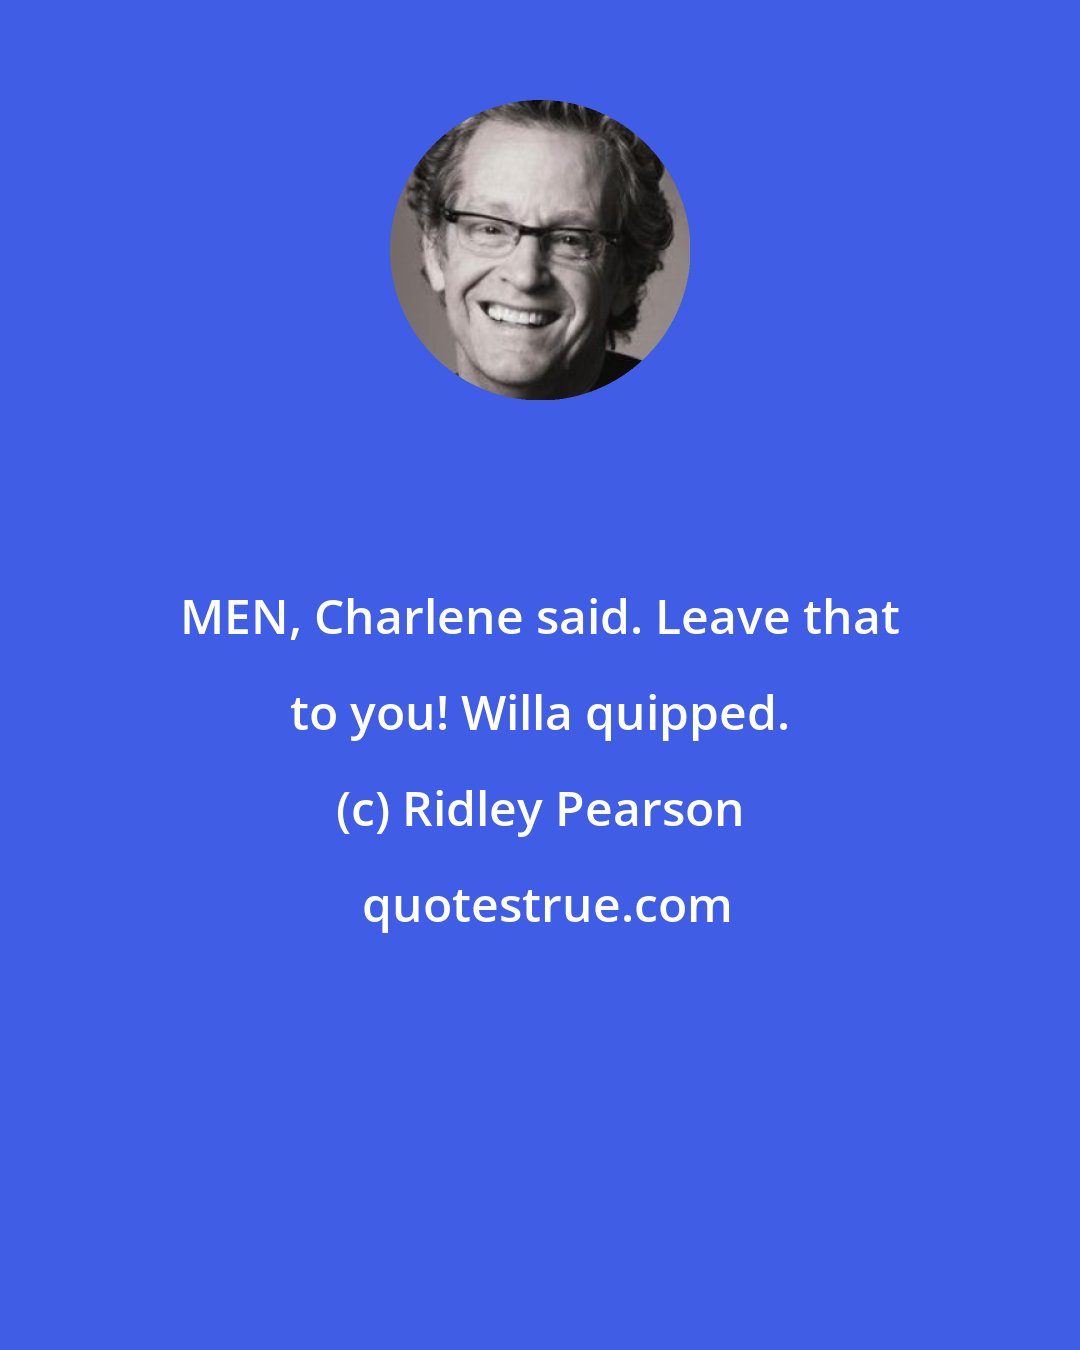 Ridley Pearson: MEN, Charlene said. Leave that to you! Willa quipped.